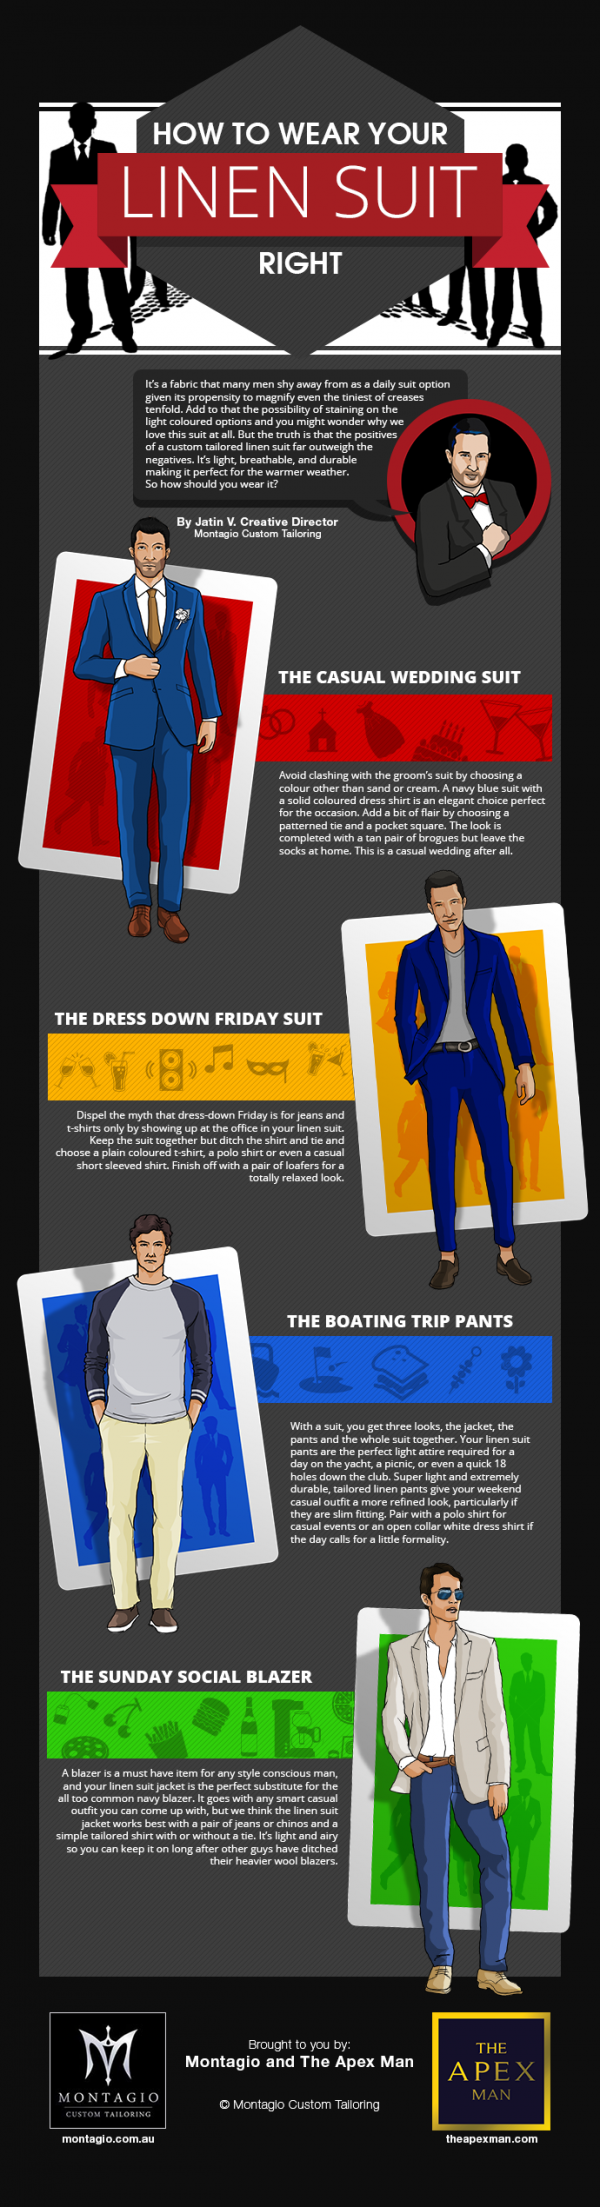 How-to-Wear-Your-Linen-Suit-Right-infograph